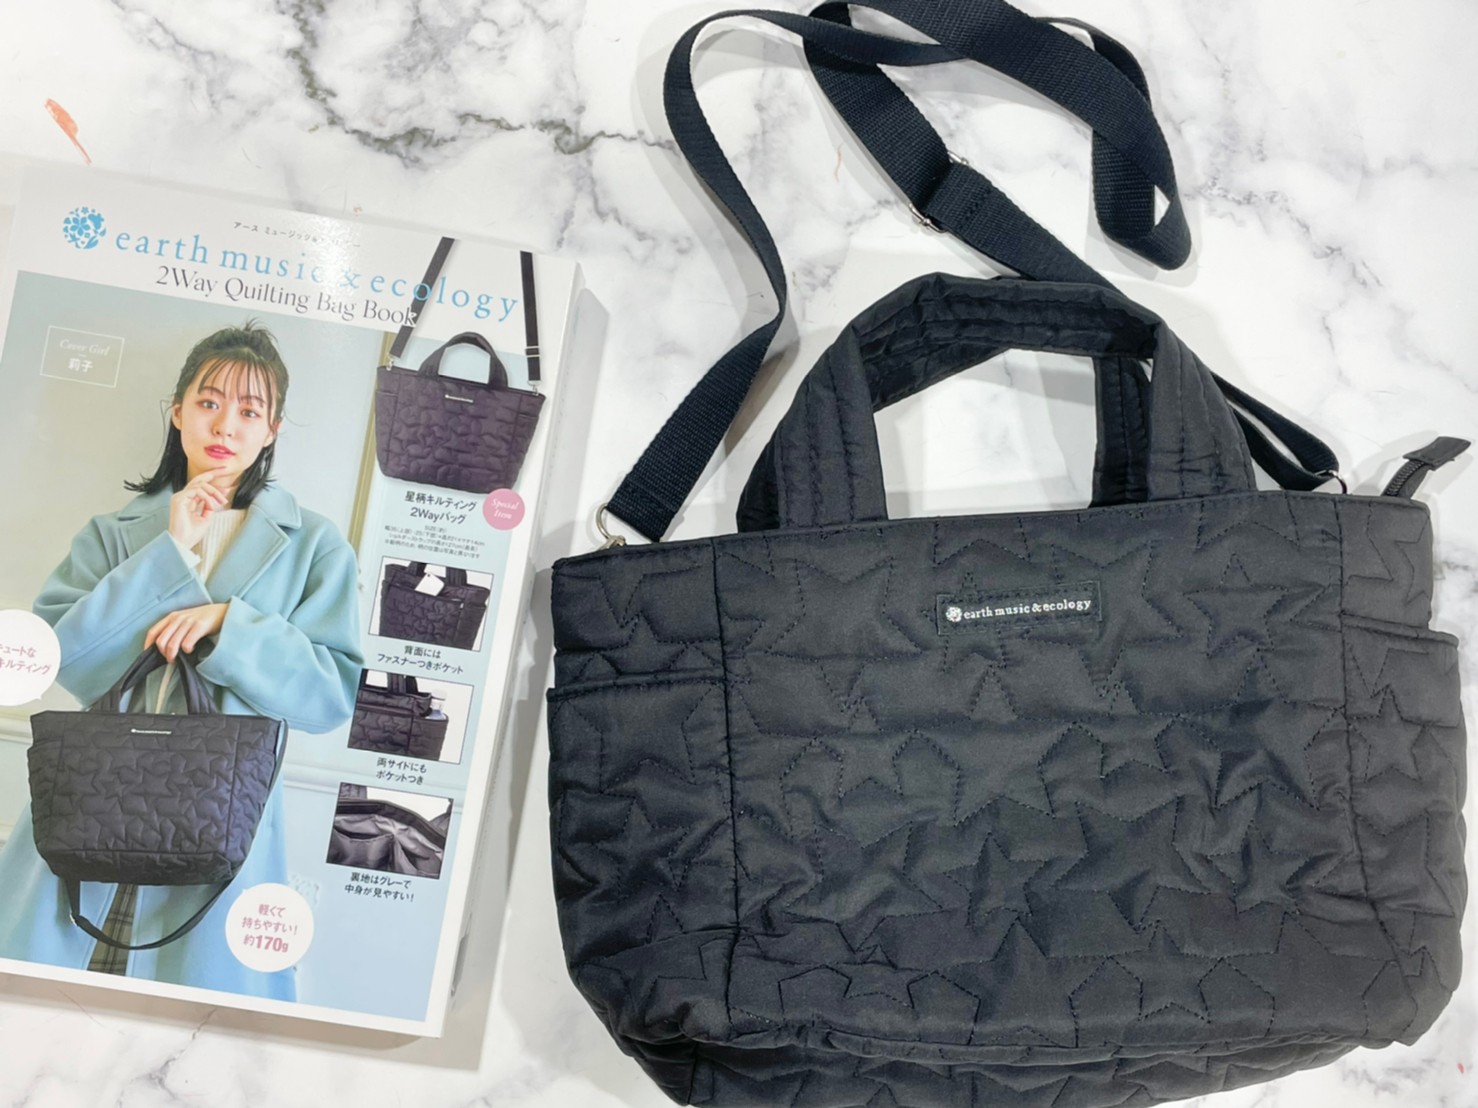 earth music&ecology 2Way Quilting Bag Bookと付録画像